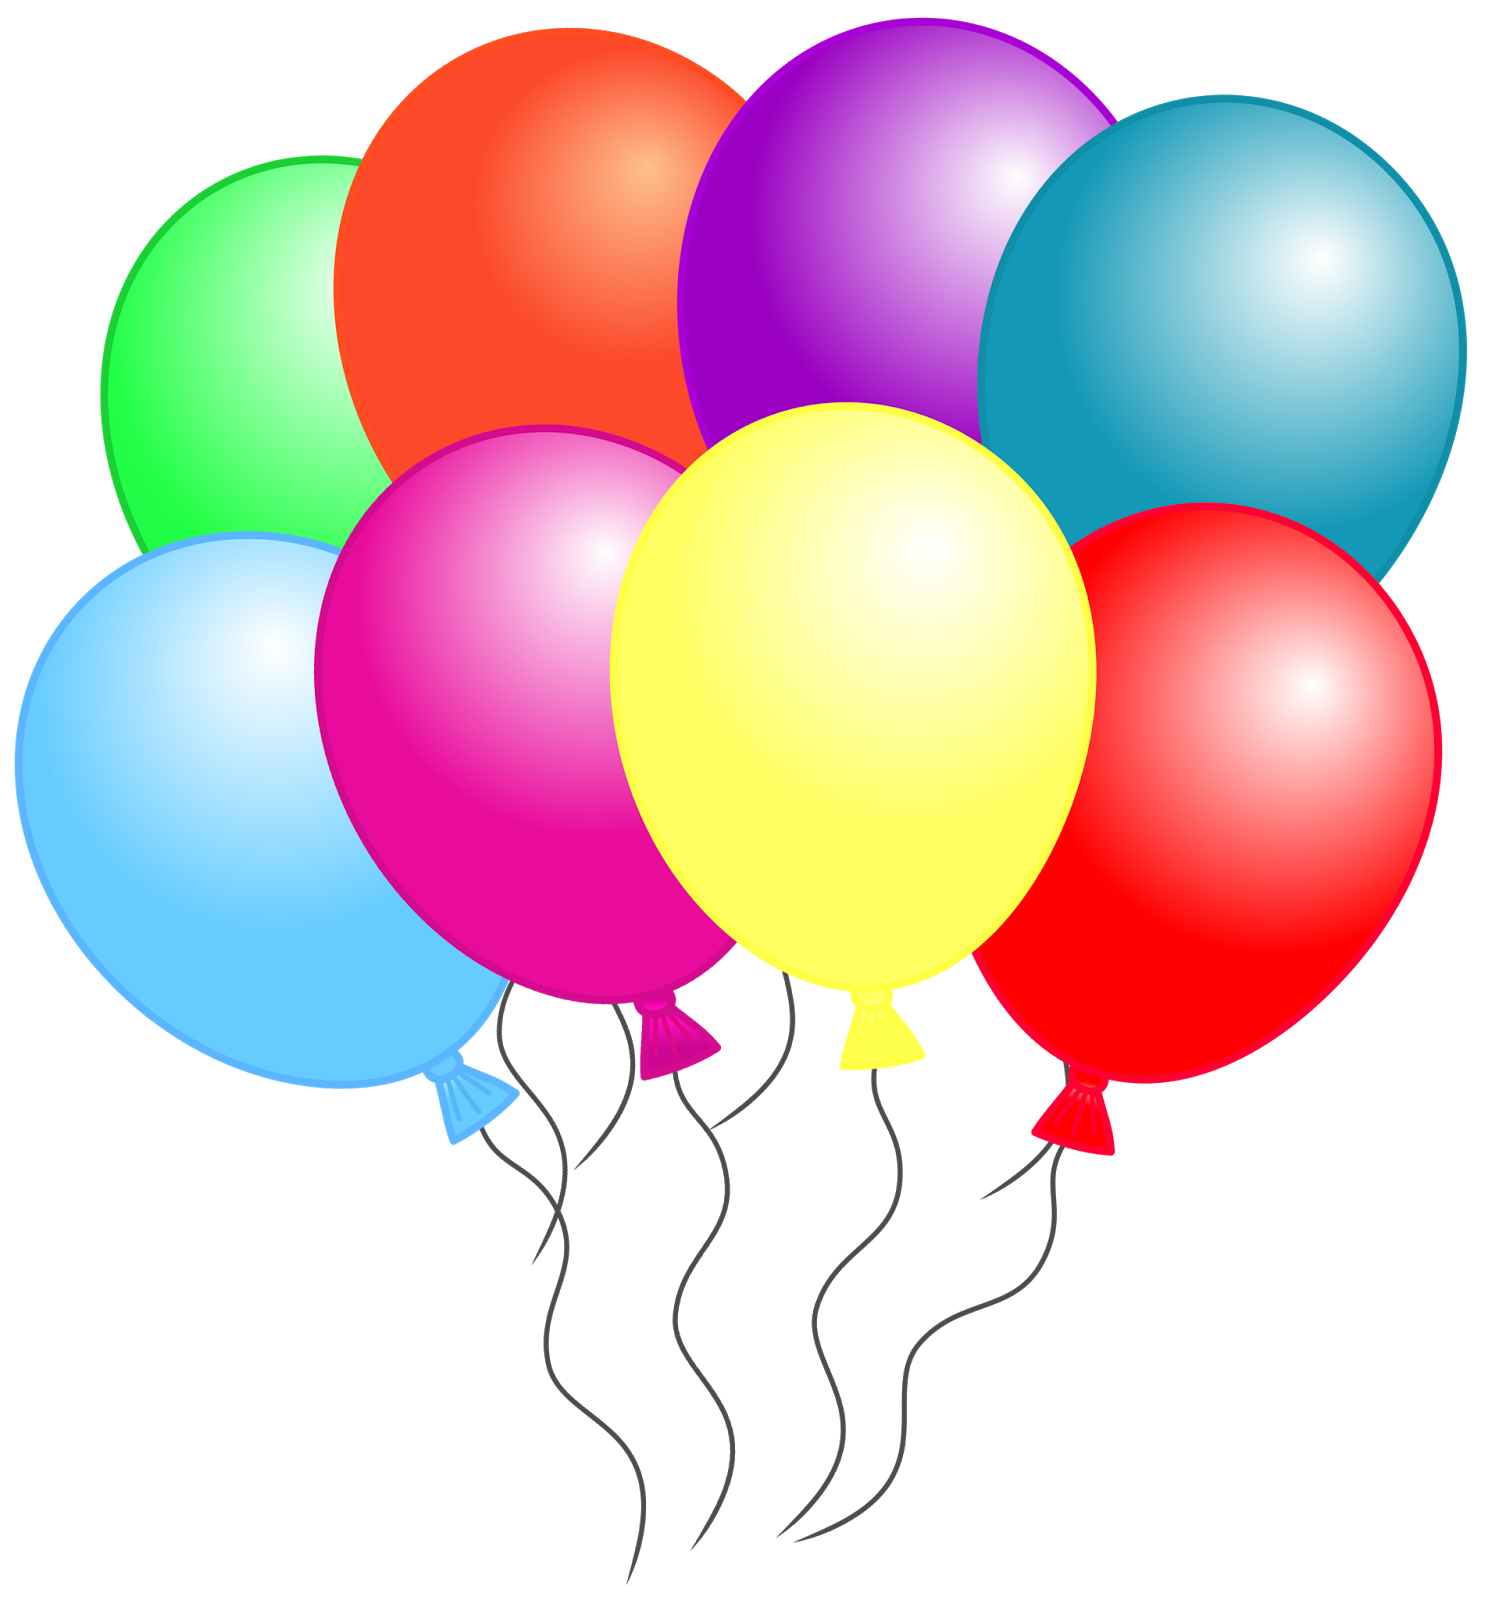 Balloon that can be. Clipart candle single